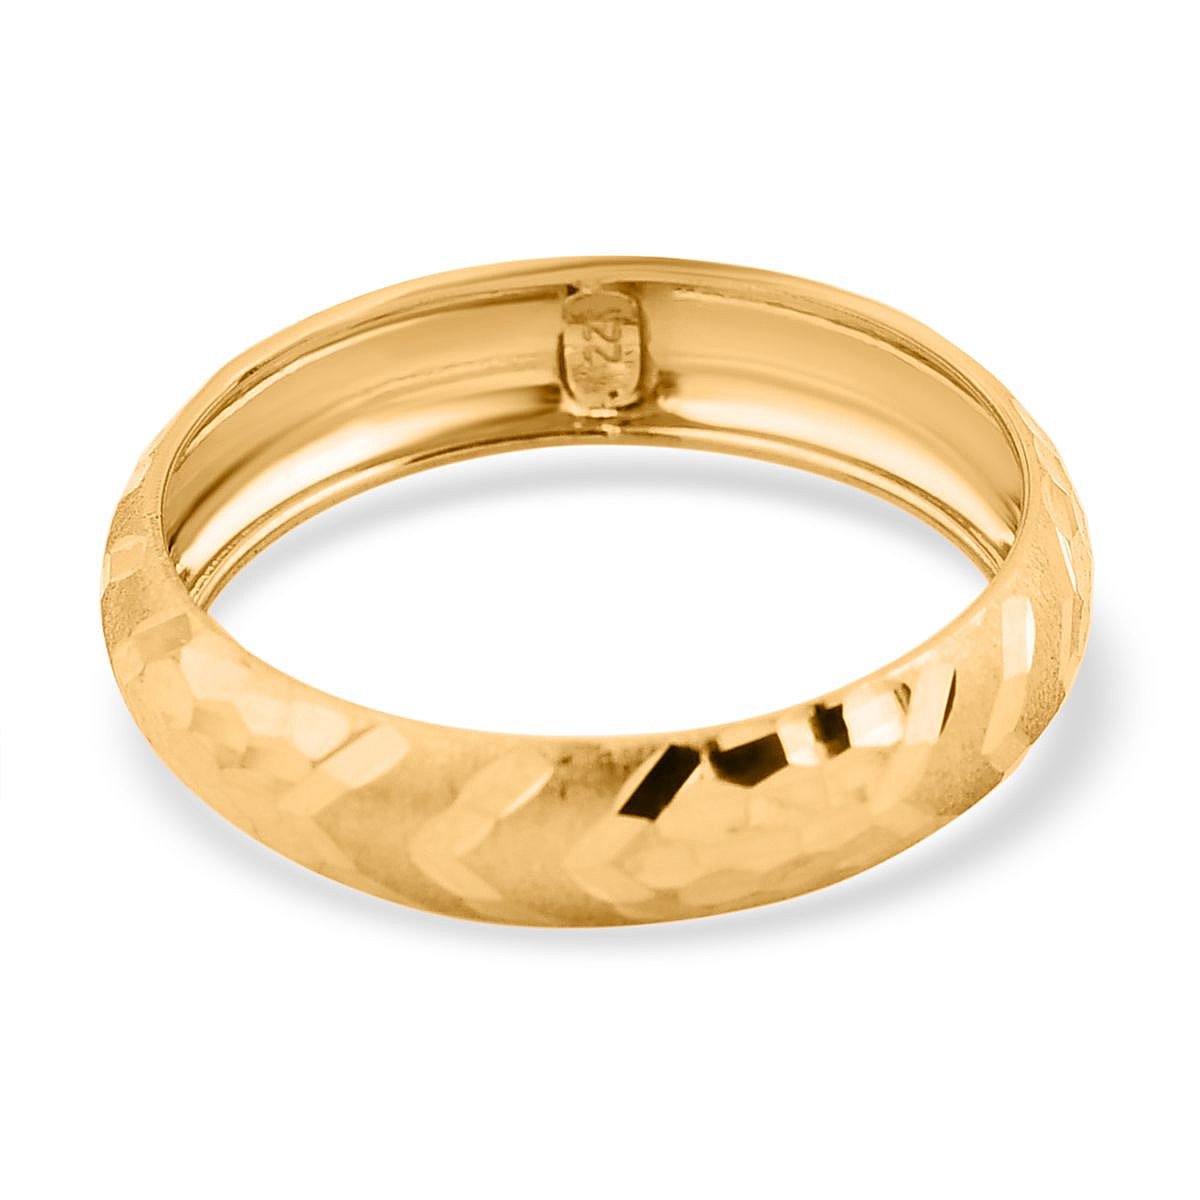 22K Yellow Gold  Ring,  Gold Wt. 1.26 Gms